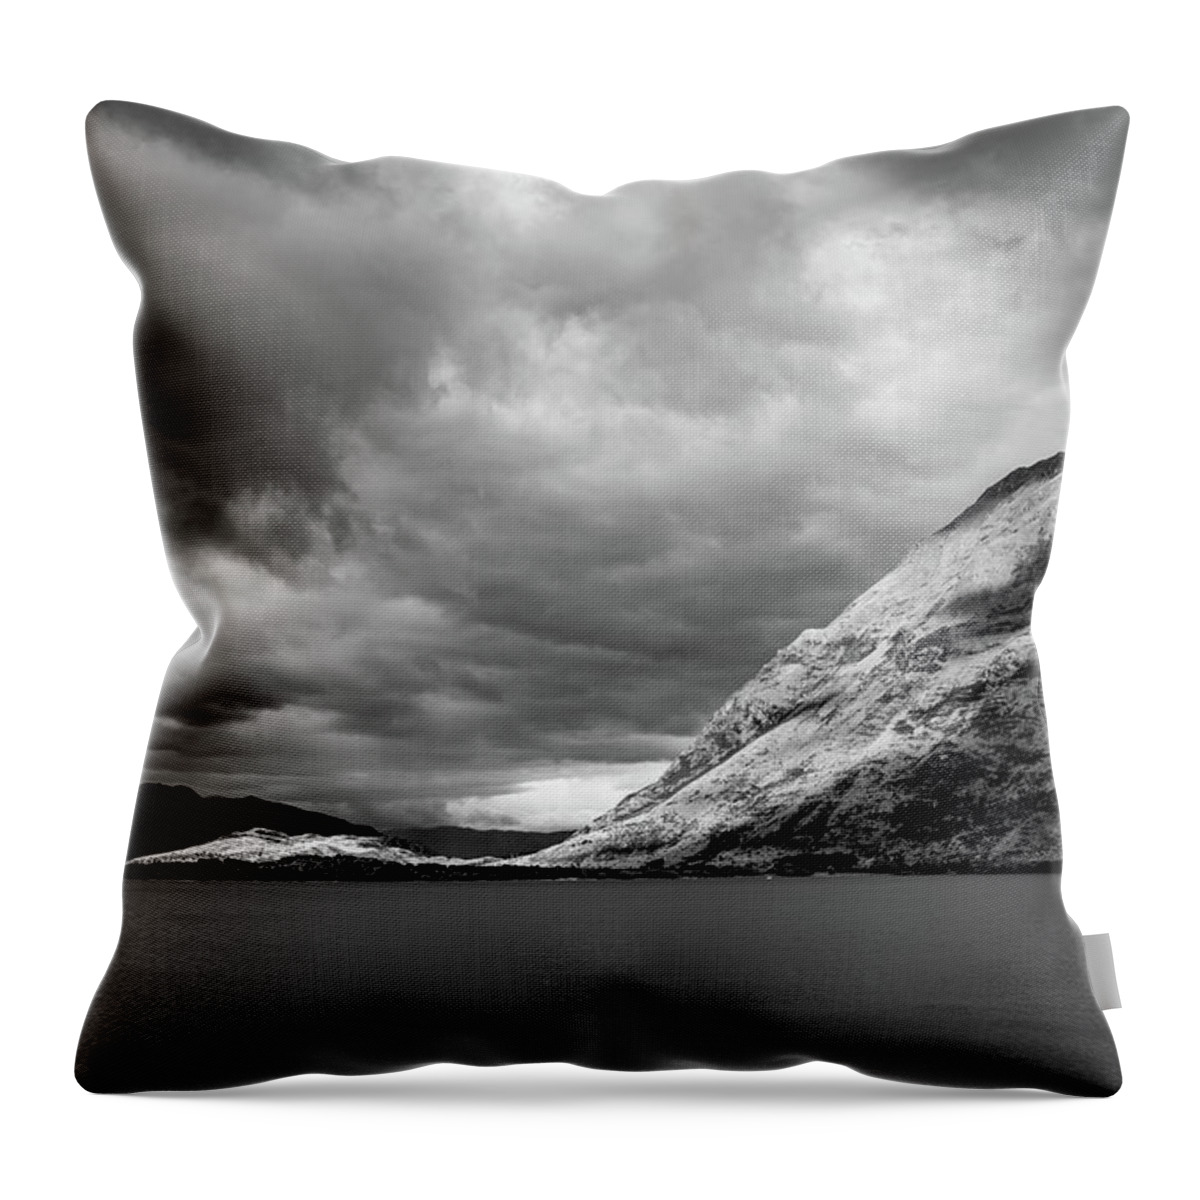 #nofilter #blackandwhite #newzealand #landscape #mountain #hills #clouds #cloudy #lake Throw Pillow featuring the photograph Elephant Into The Lake by Itto Ogami